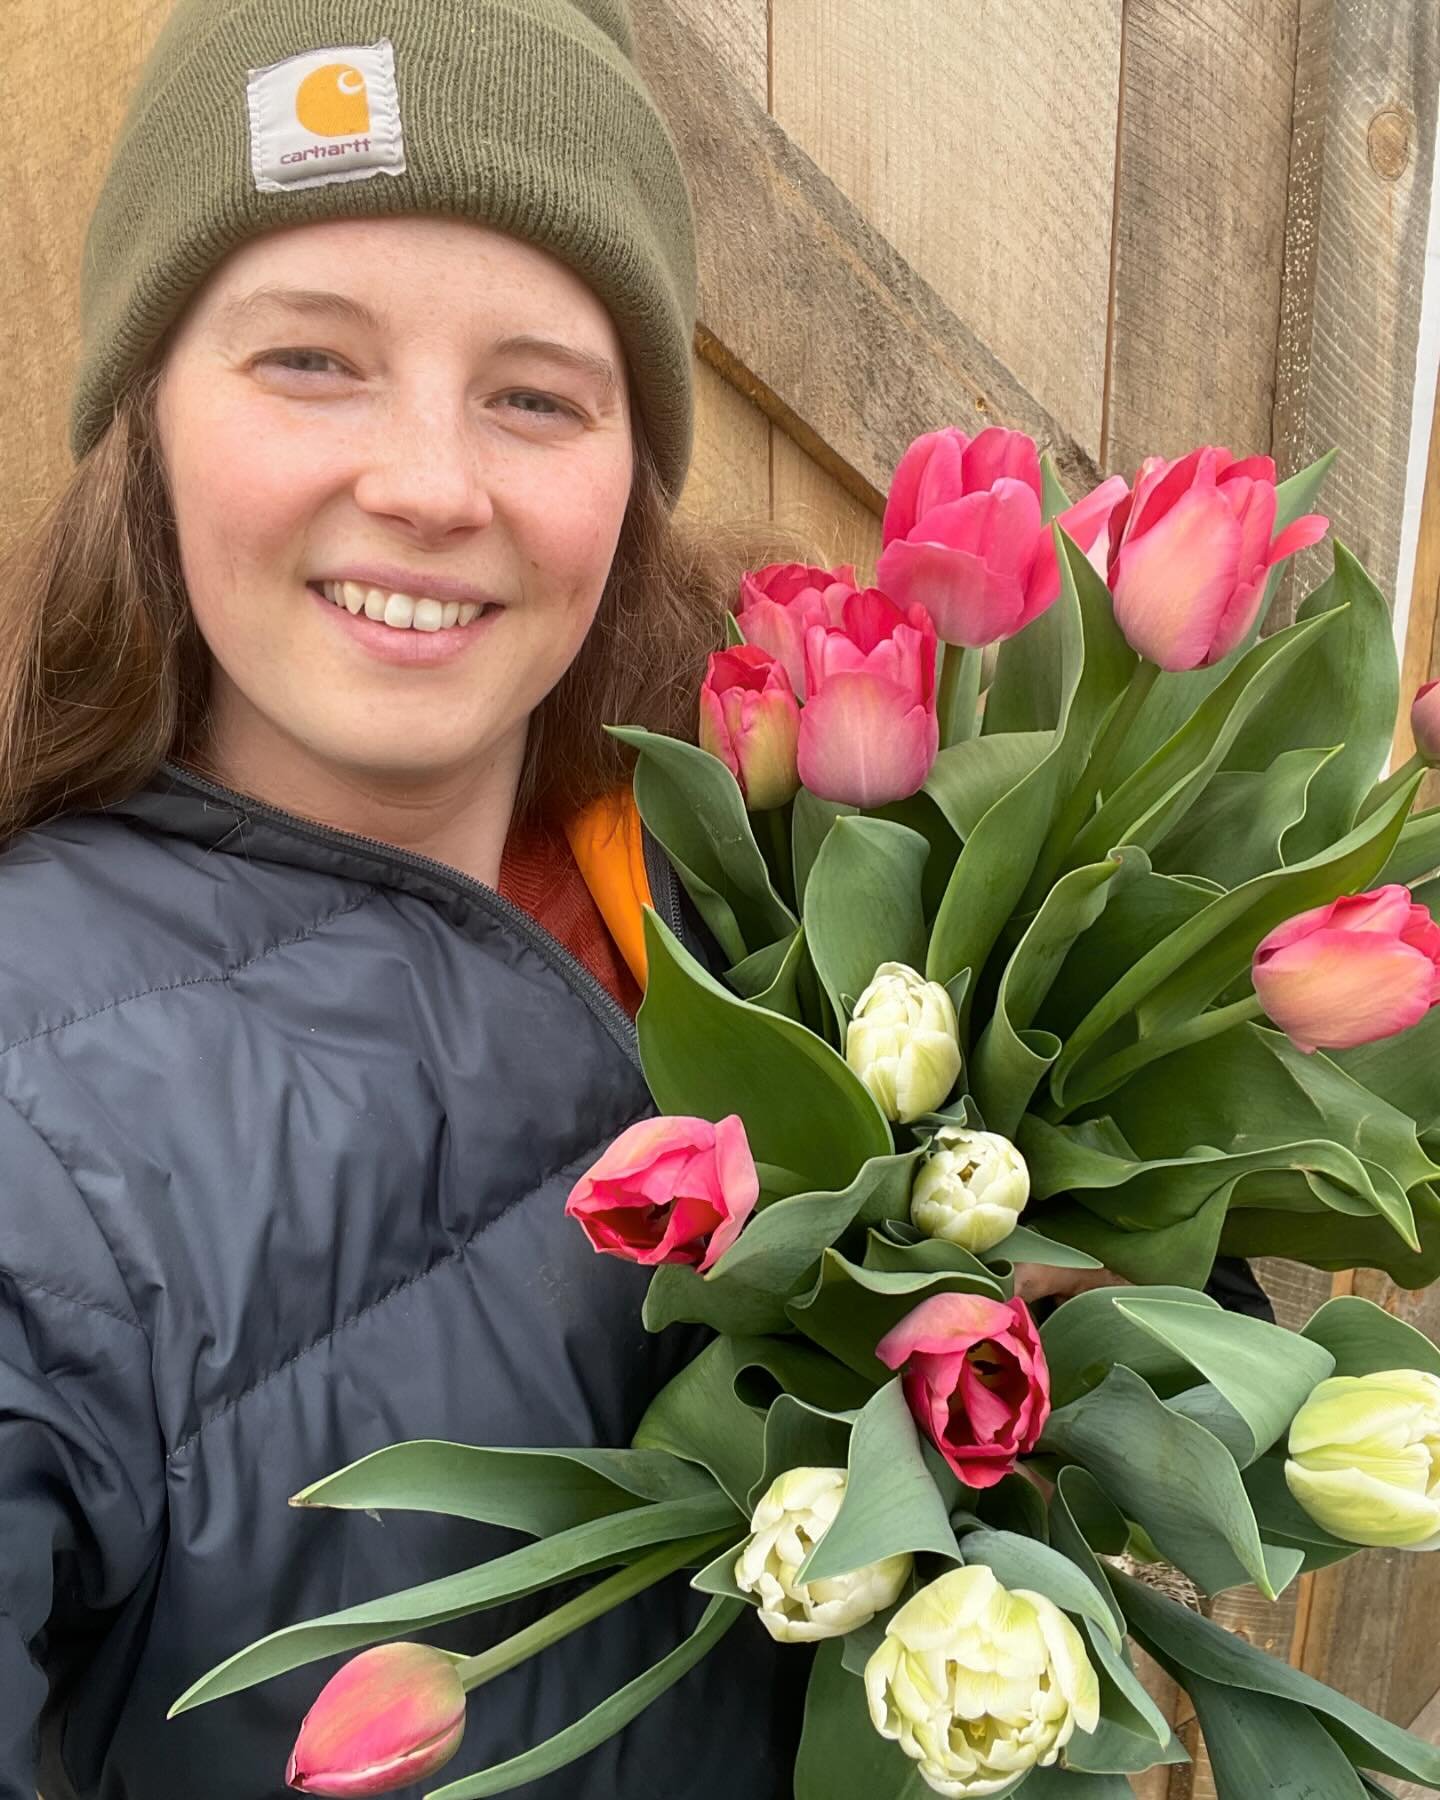 The first arm load of flowers in the second week of April! I&rsquo;ll take it 🤩🌷 I planted tulips all over the farm in hopes of staggering the bloom time. These are just the beginning!